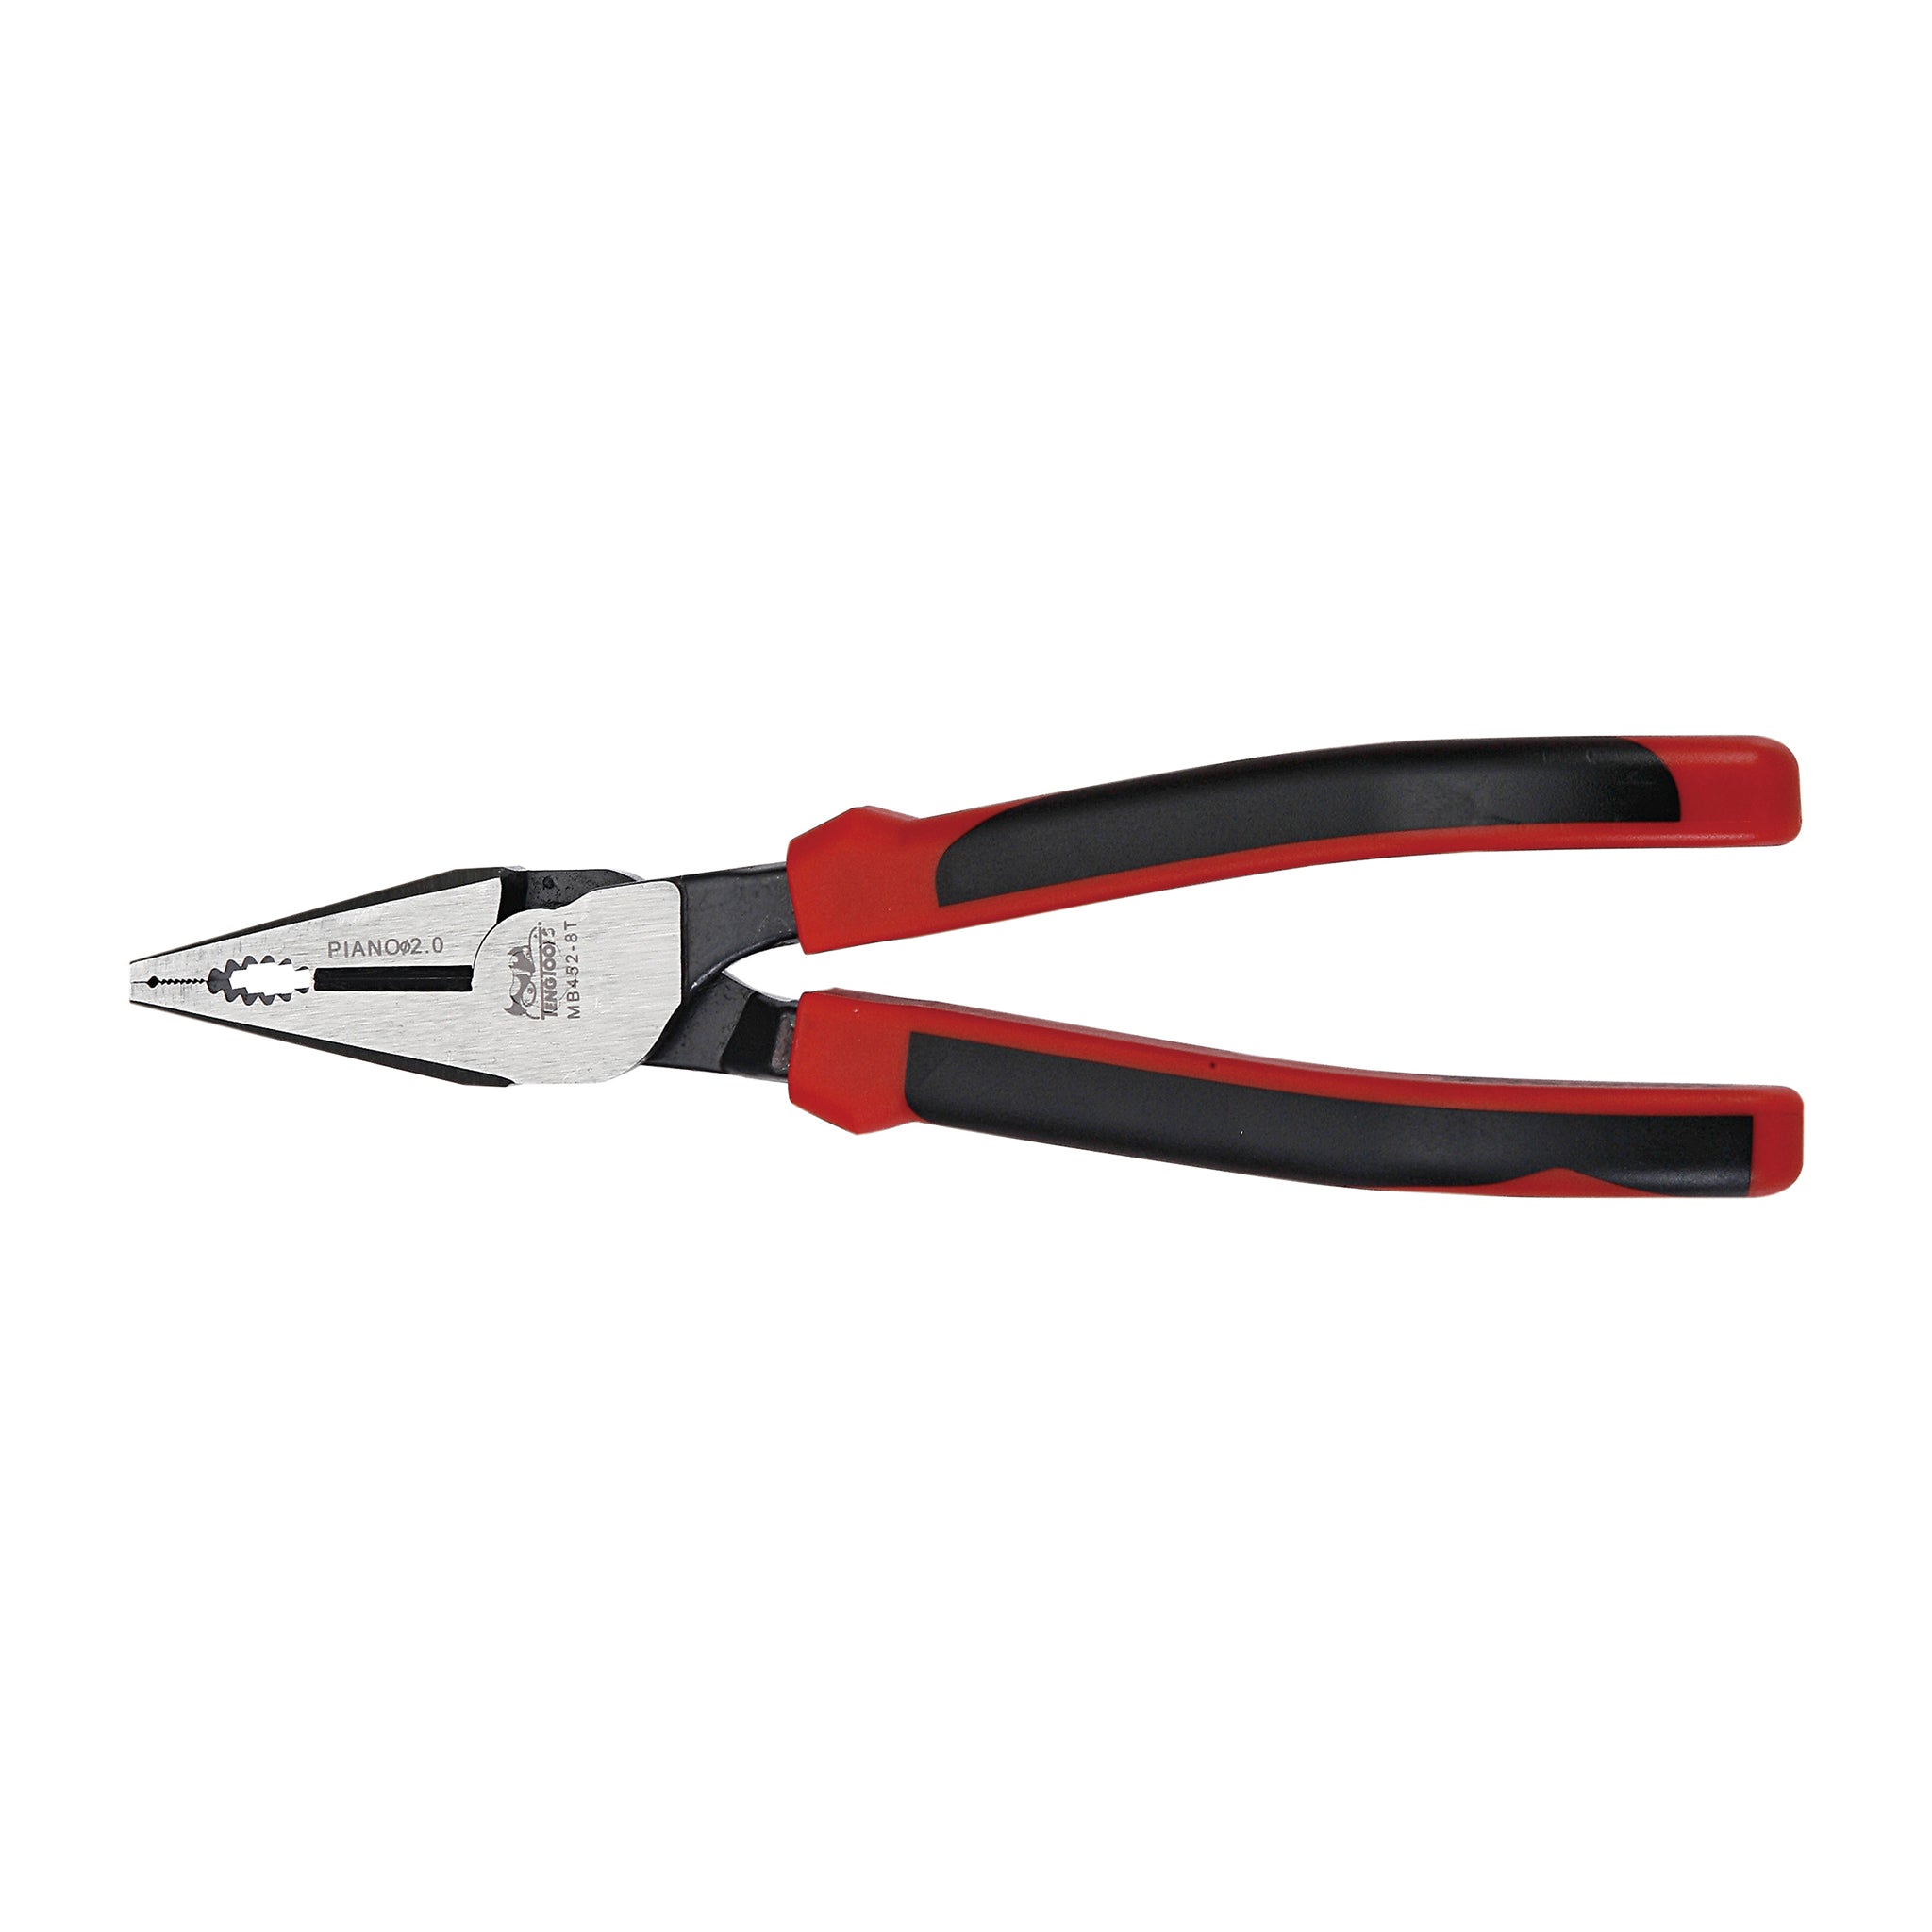 Teng Tools Combination Pliers With TPR Handles - 8